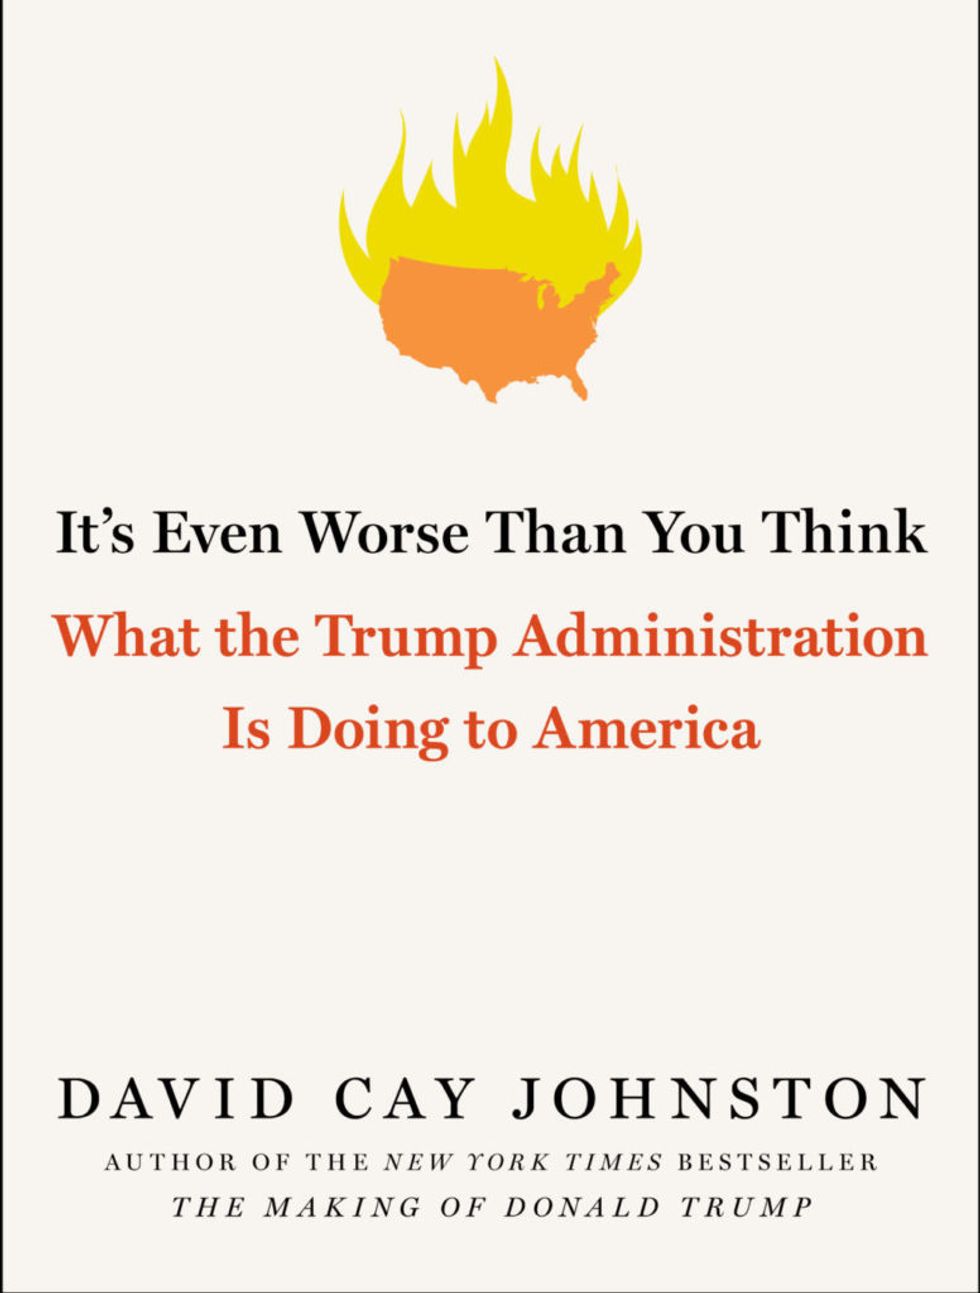 Excerpt: It’s Even Worse Than You Think